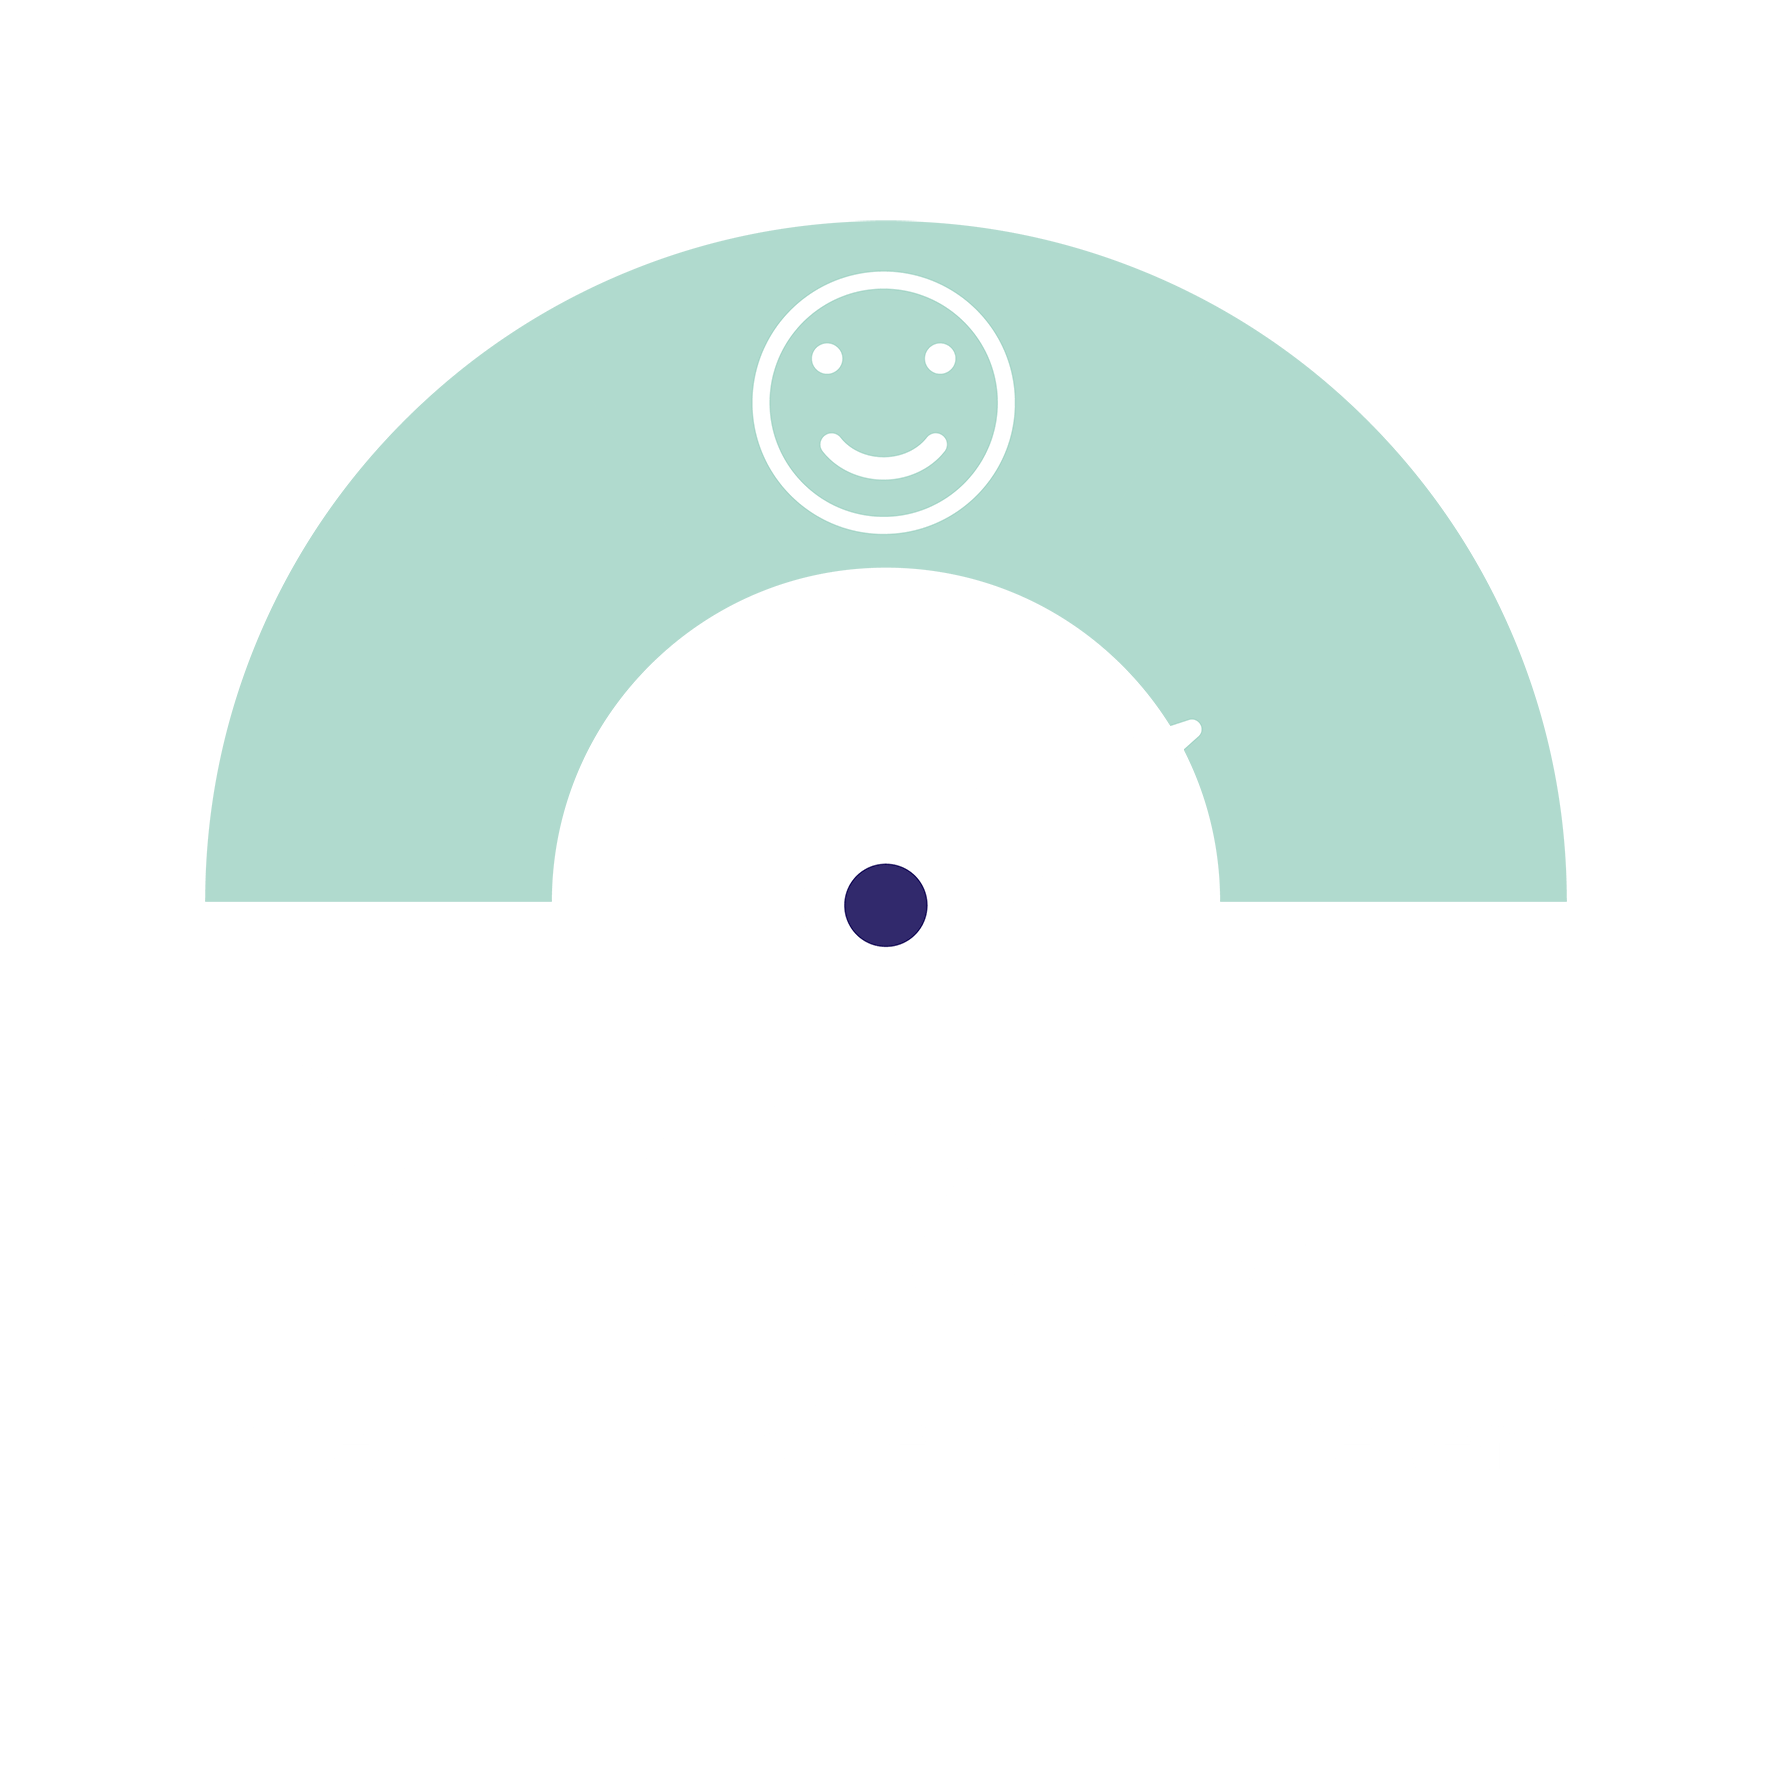 98.2% of clients rate TTC trainers as excellent